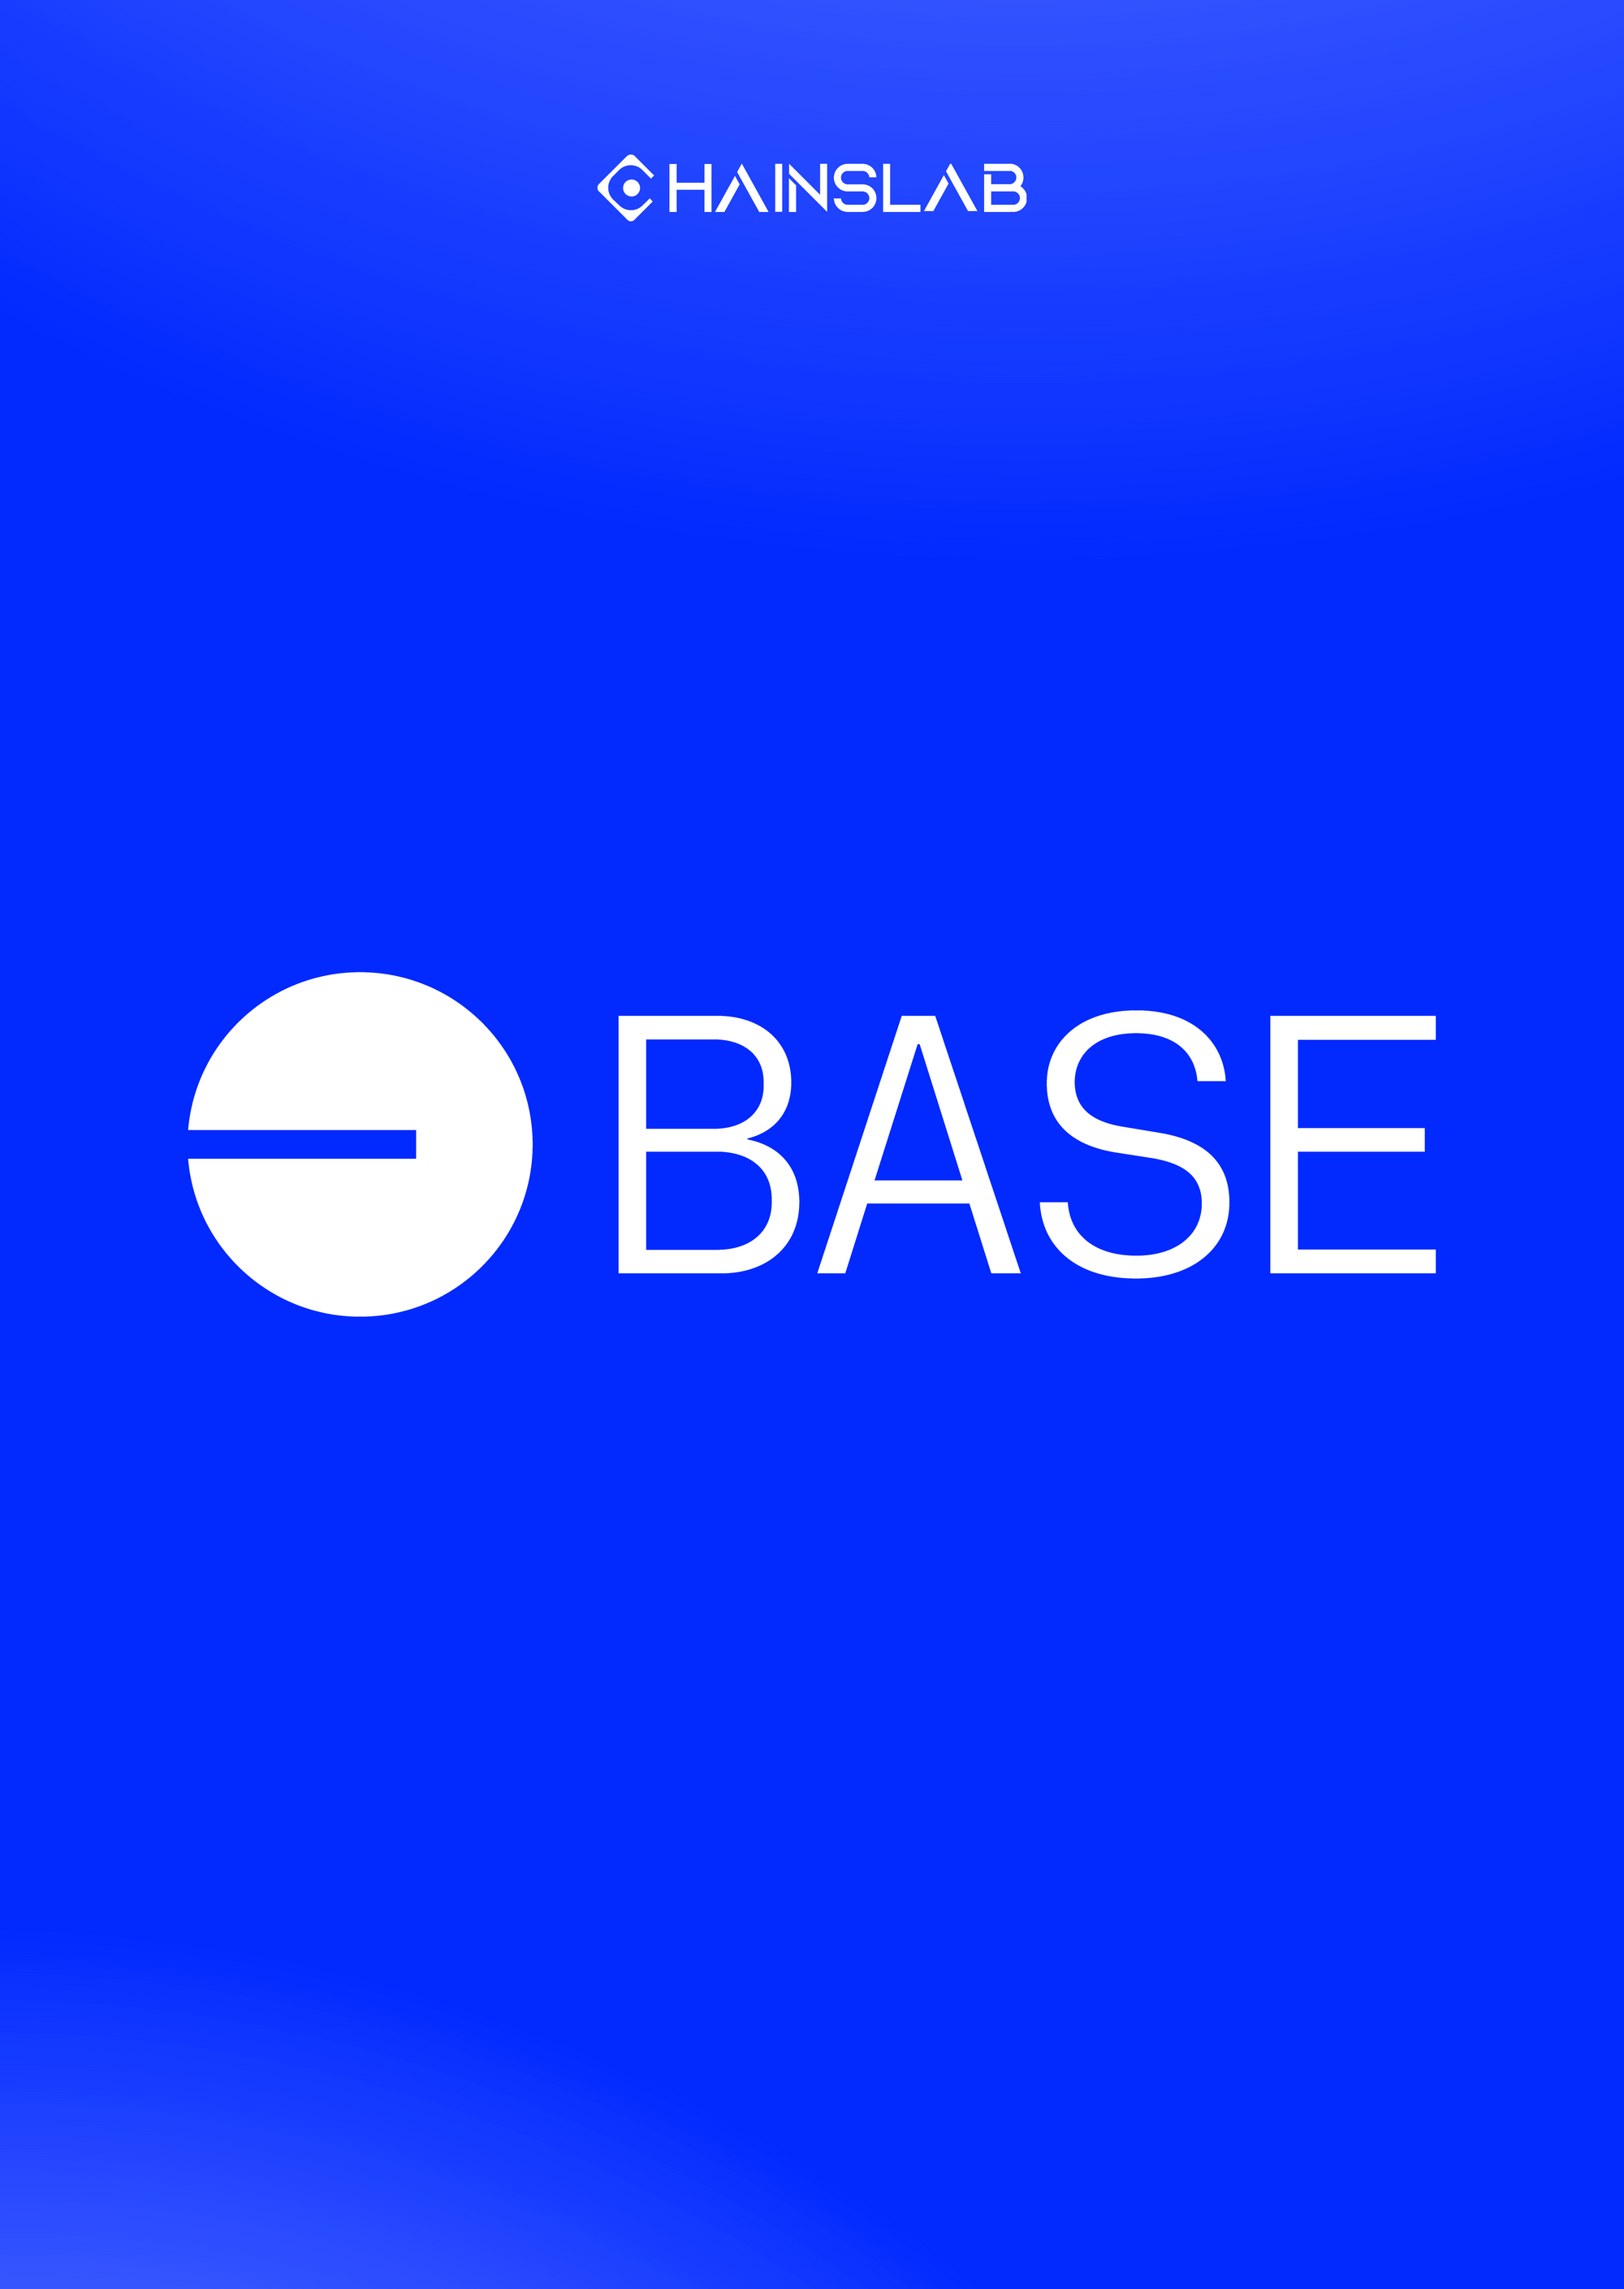 What is Base - Coinbase Layer 2 Chain?